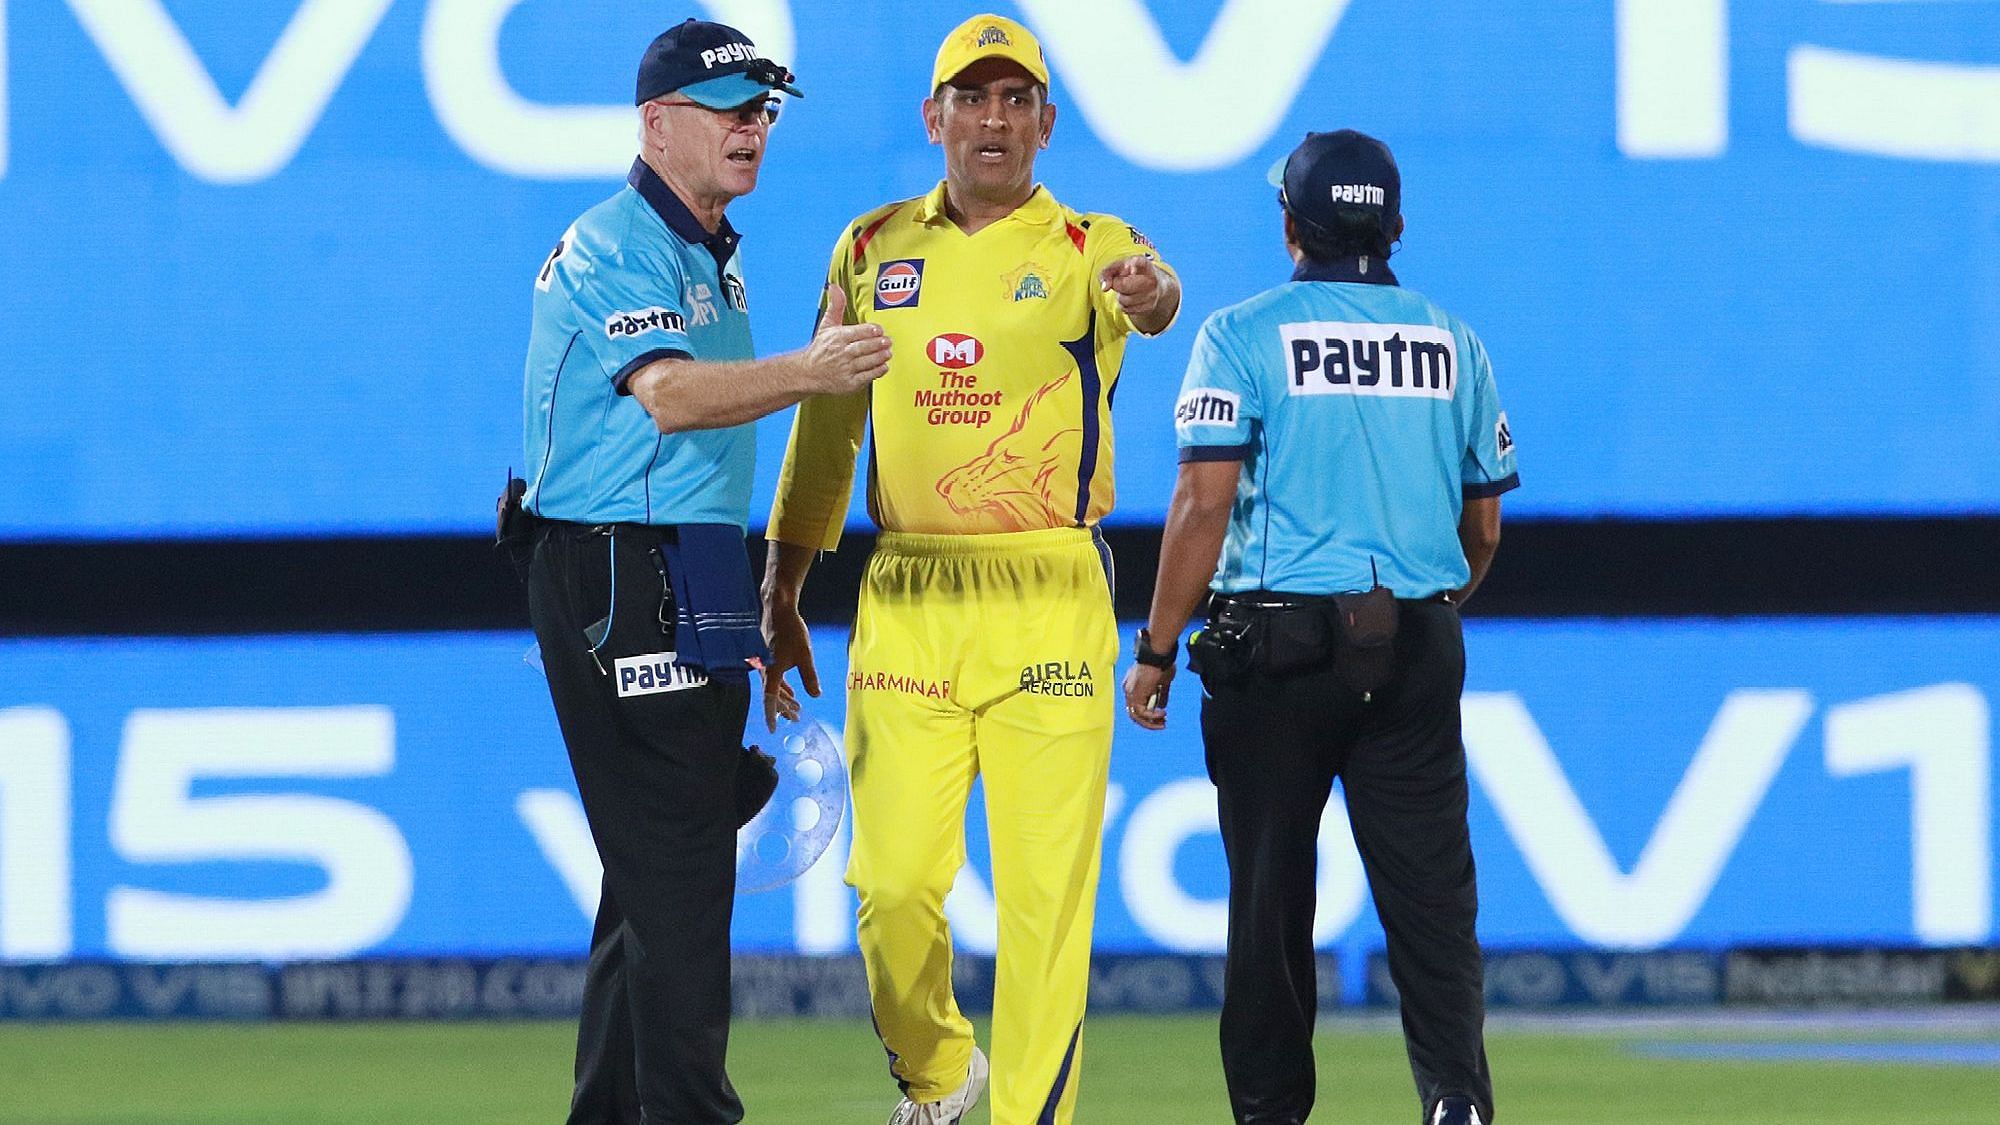 Dhoni was seen shouting ‘No ball’ from the dug-out as Ravindra Jadeja was seen arguing with the umpire.